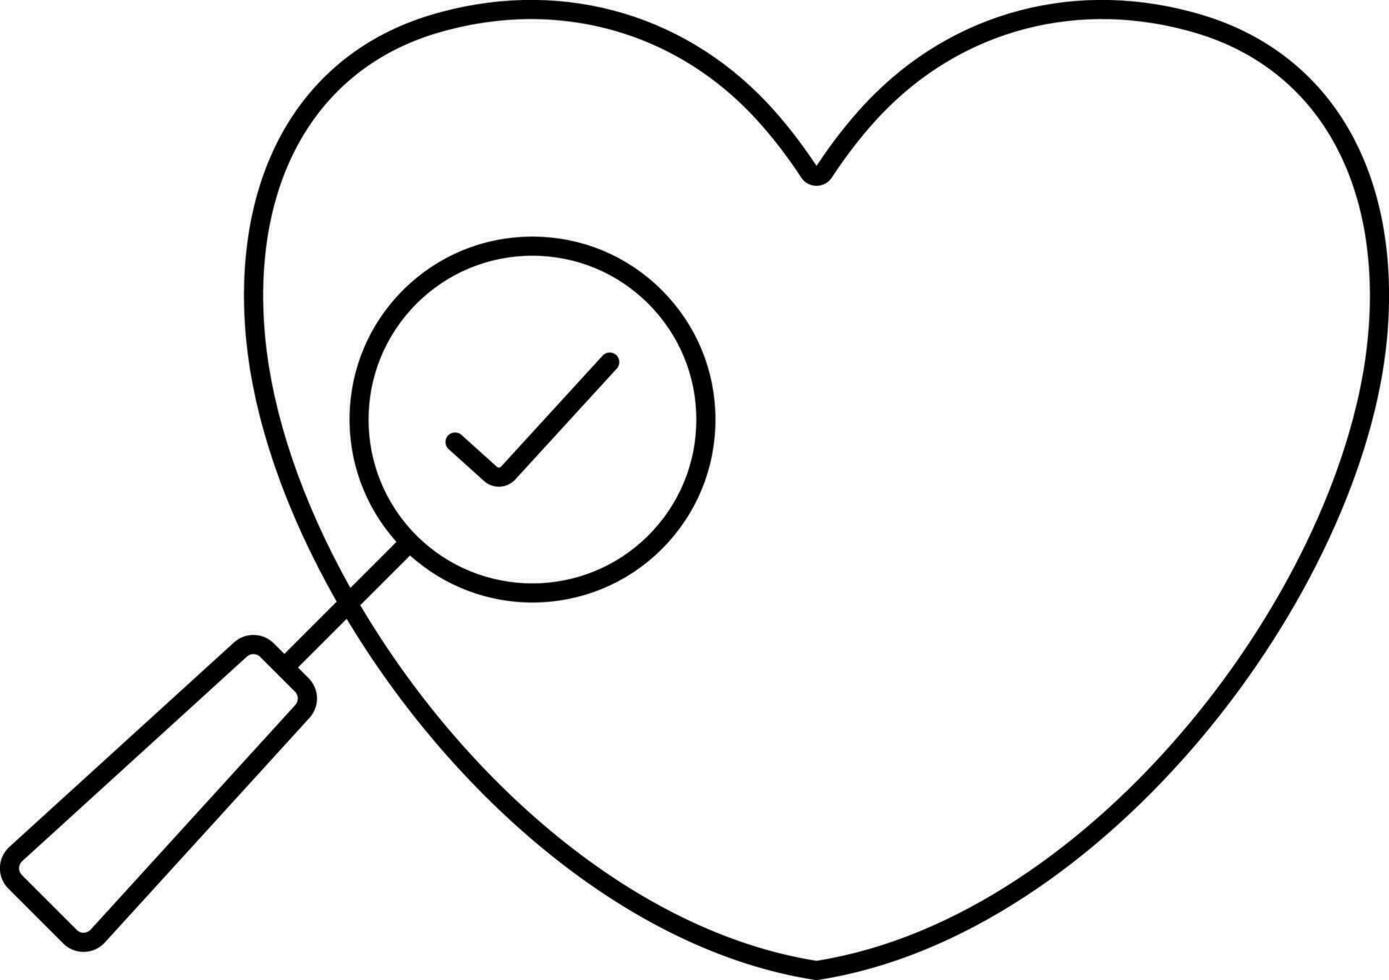 Searching Heart And Checkmark Icon In Black Line Art. vector